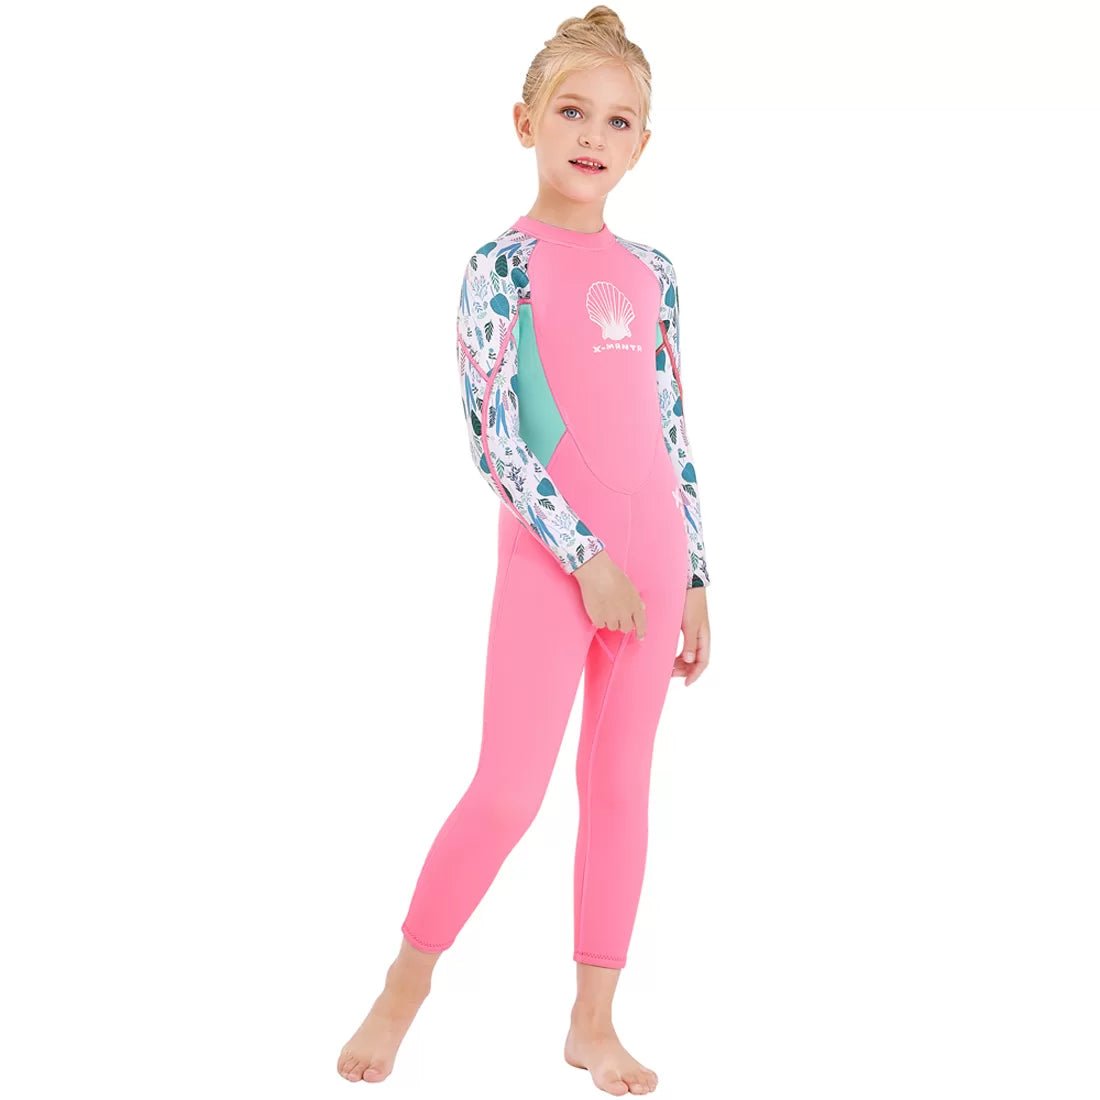 2.55mm Neoprene Full Length Kids Swimsuit, Fluorescent Pink with Floral Sleeve with UV protection - Little Surprise Box2.55mm Neoprene Full Length Kids Swimsuit, Fluorescent Pink with Floral Sleeve with UV protection